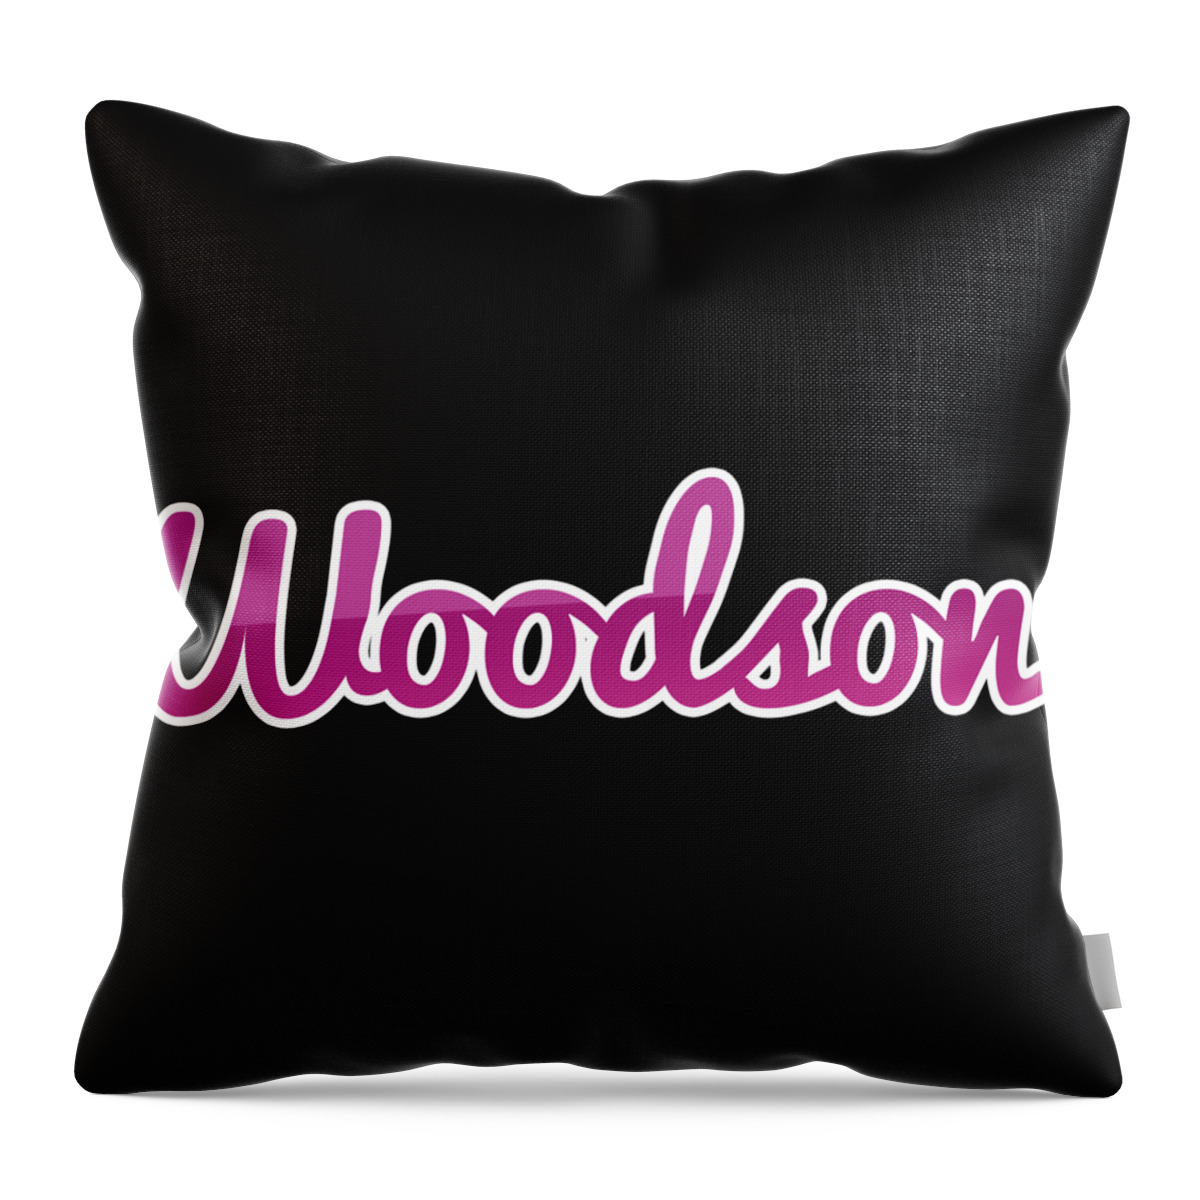 Woodson Throw Pillow featuring the digital art Woodson #Woodson by Tinto Designs